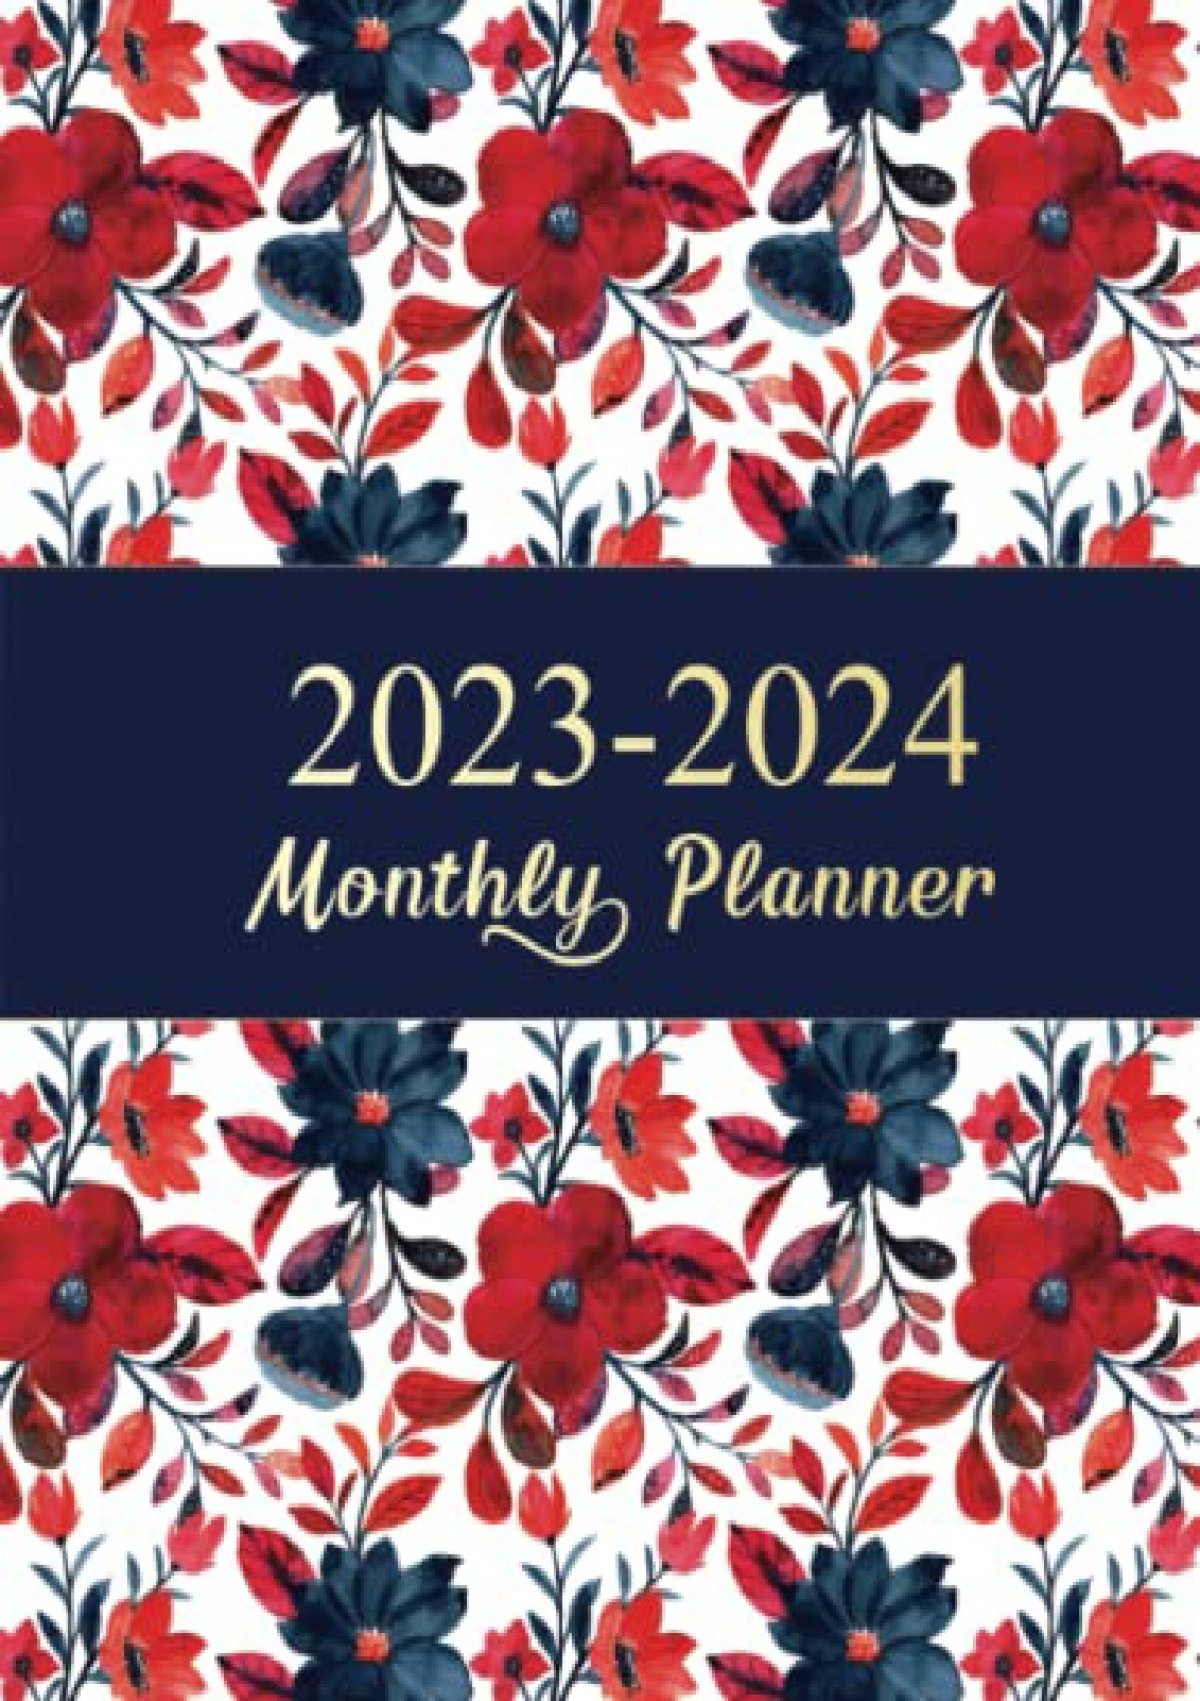 Download Book [PDF] 2023-2024 Monthly Planner: 24 Months Calendar with